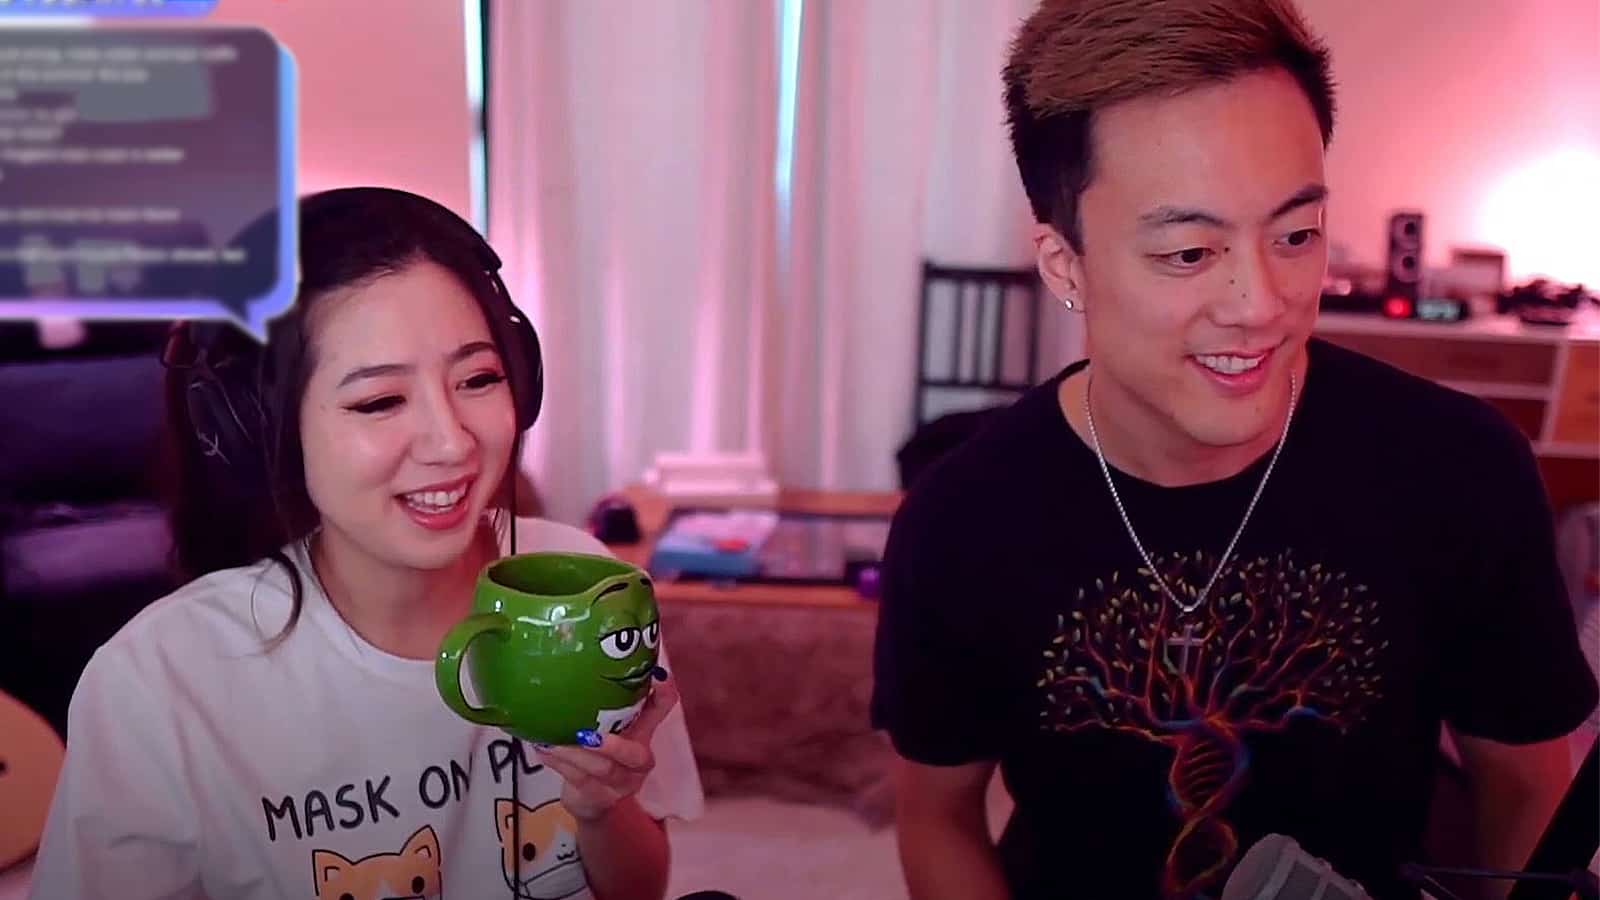 Fuslie Edison respond to dating rumors after surprise Twitch stream